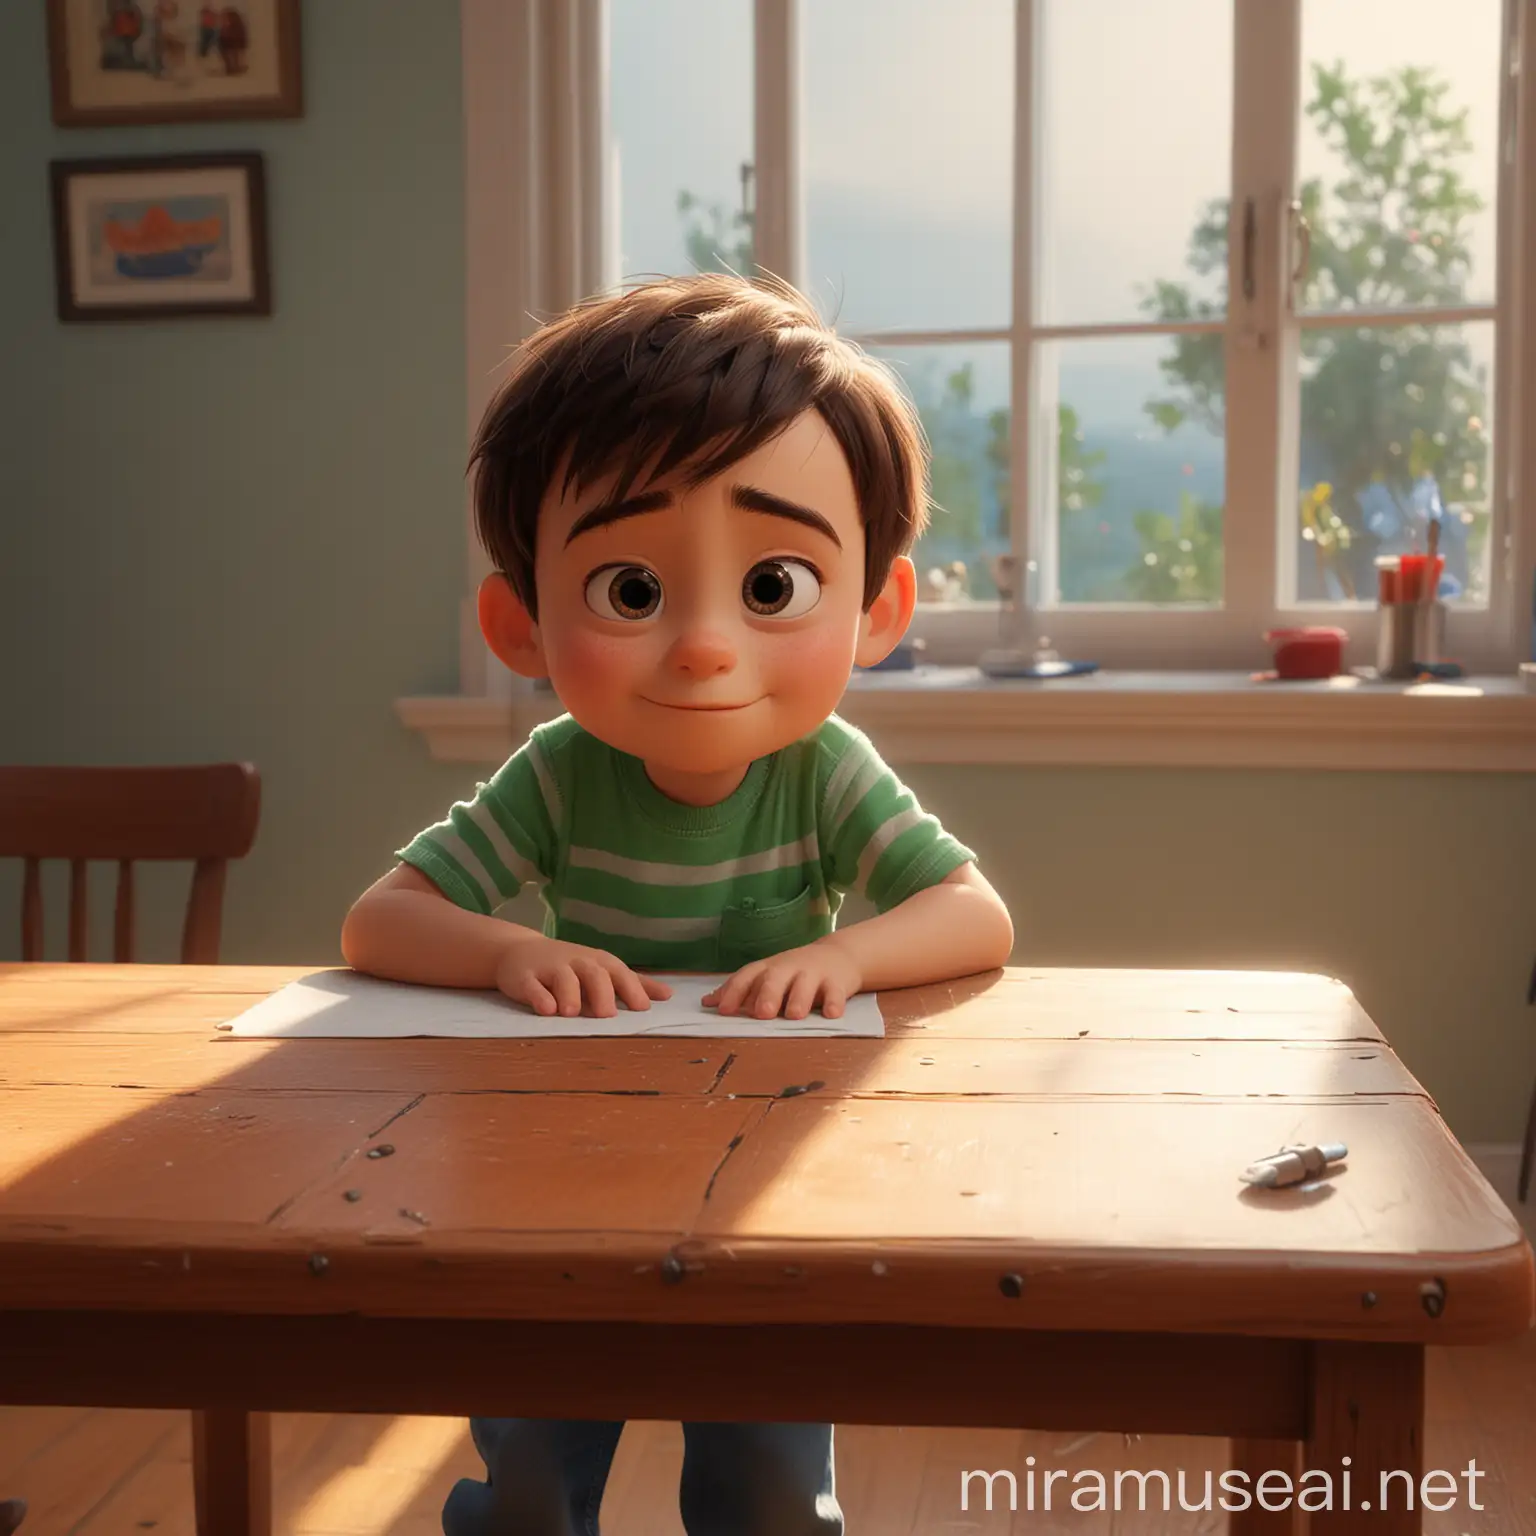 Adorable Boy Cleaning Table Pixar Style